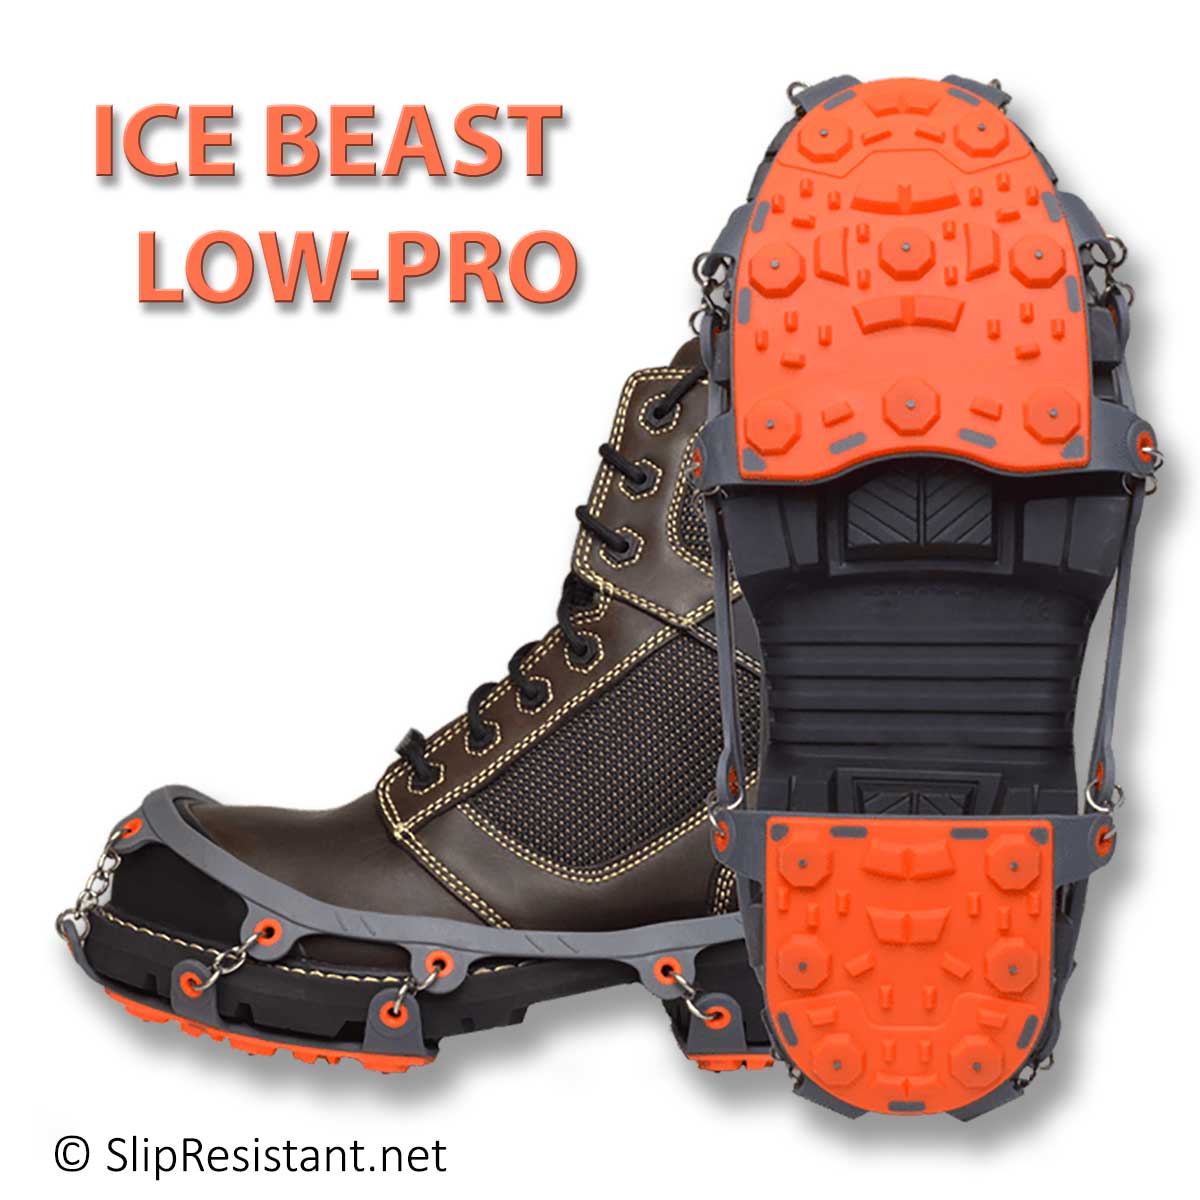 Winter Walking ICE BEAST LOW-PRO Ice Cleats for Shoes and Boots